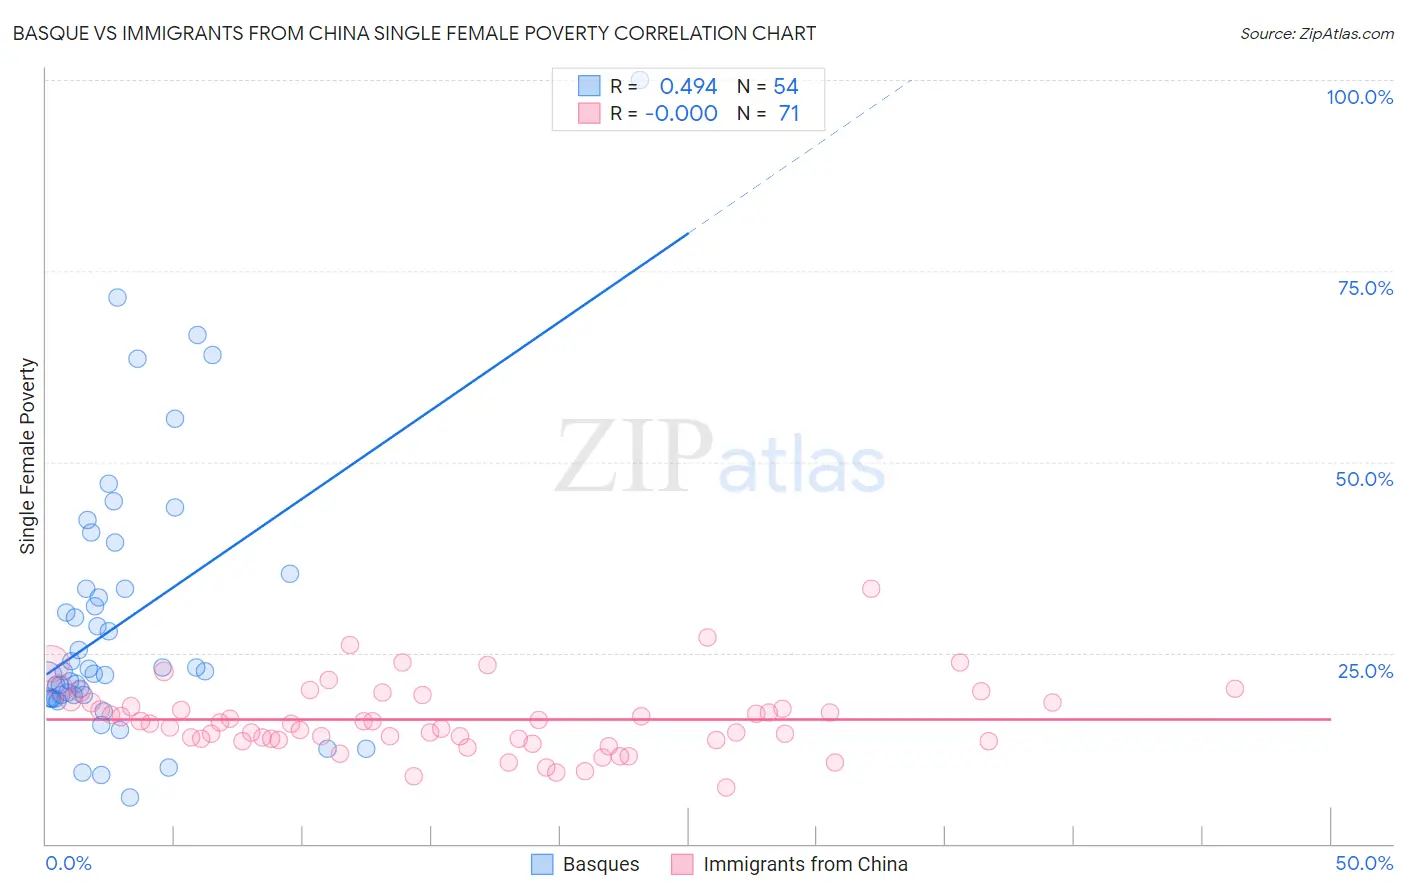 Basque vs Immigrants from China Single Female Poverty